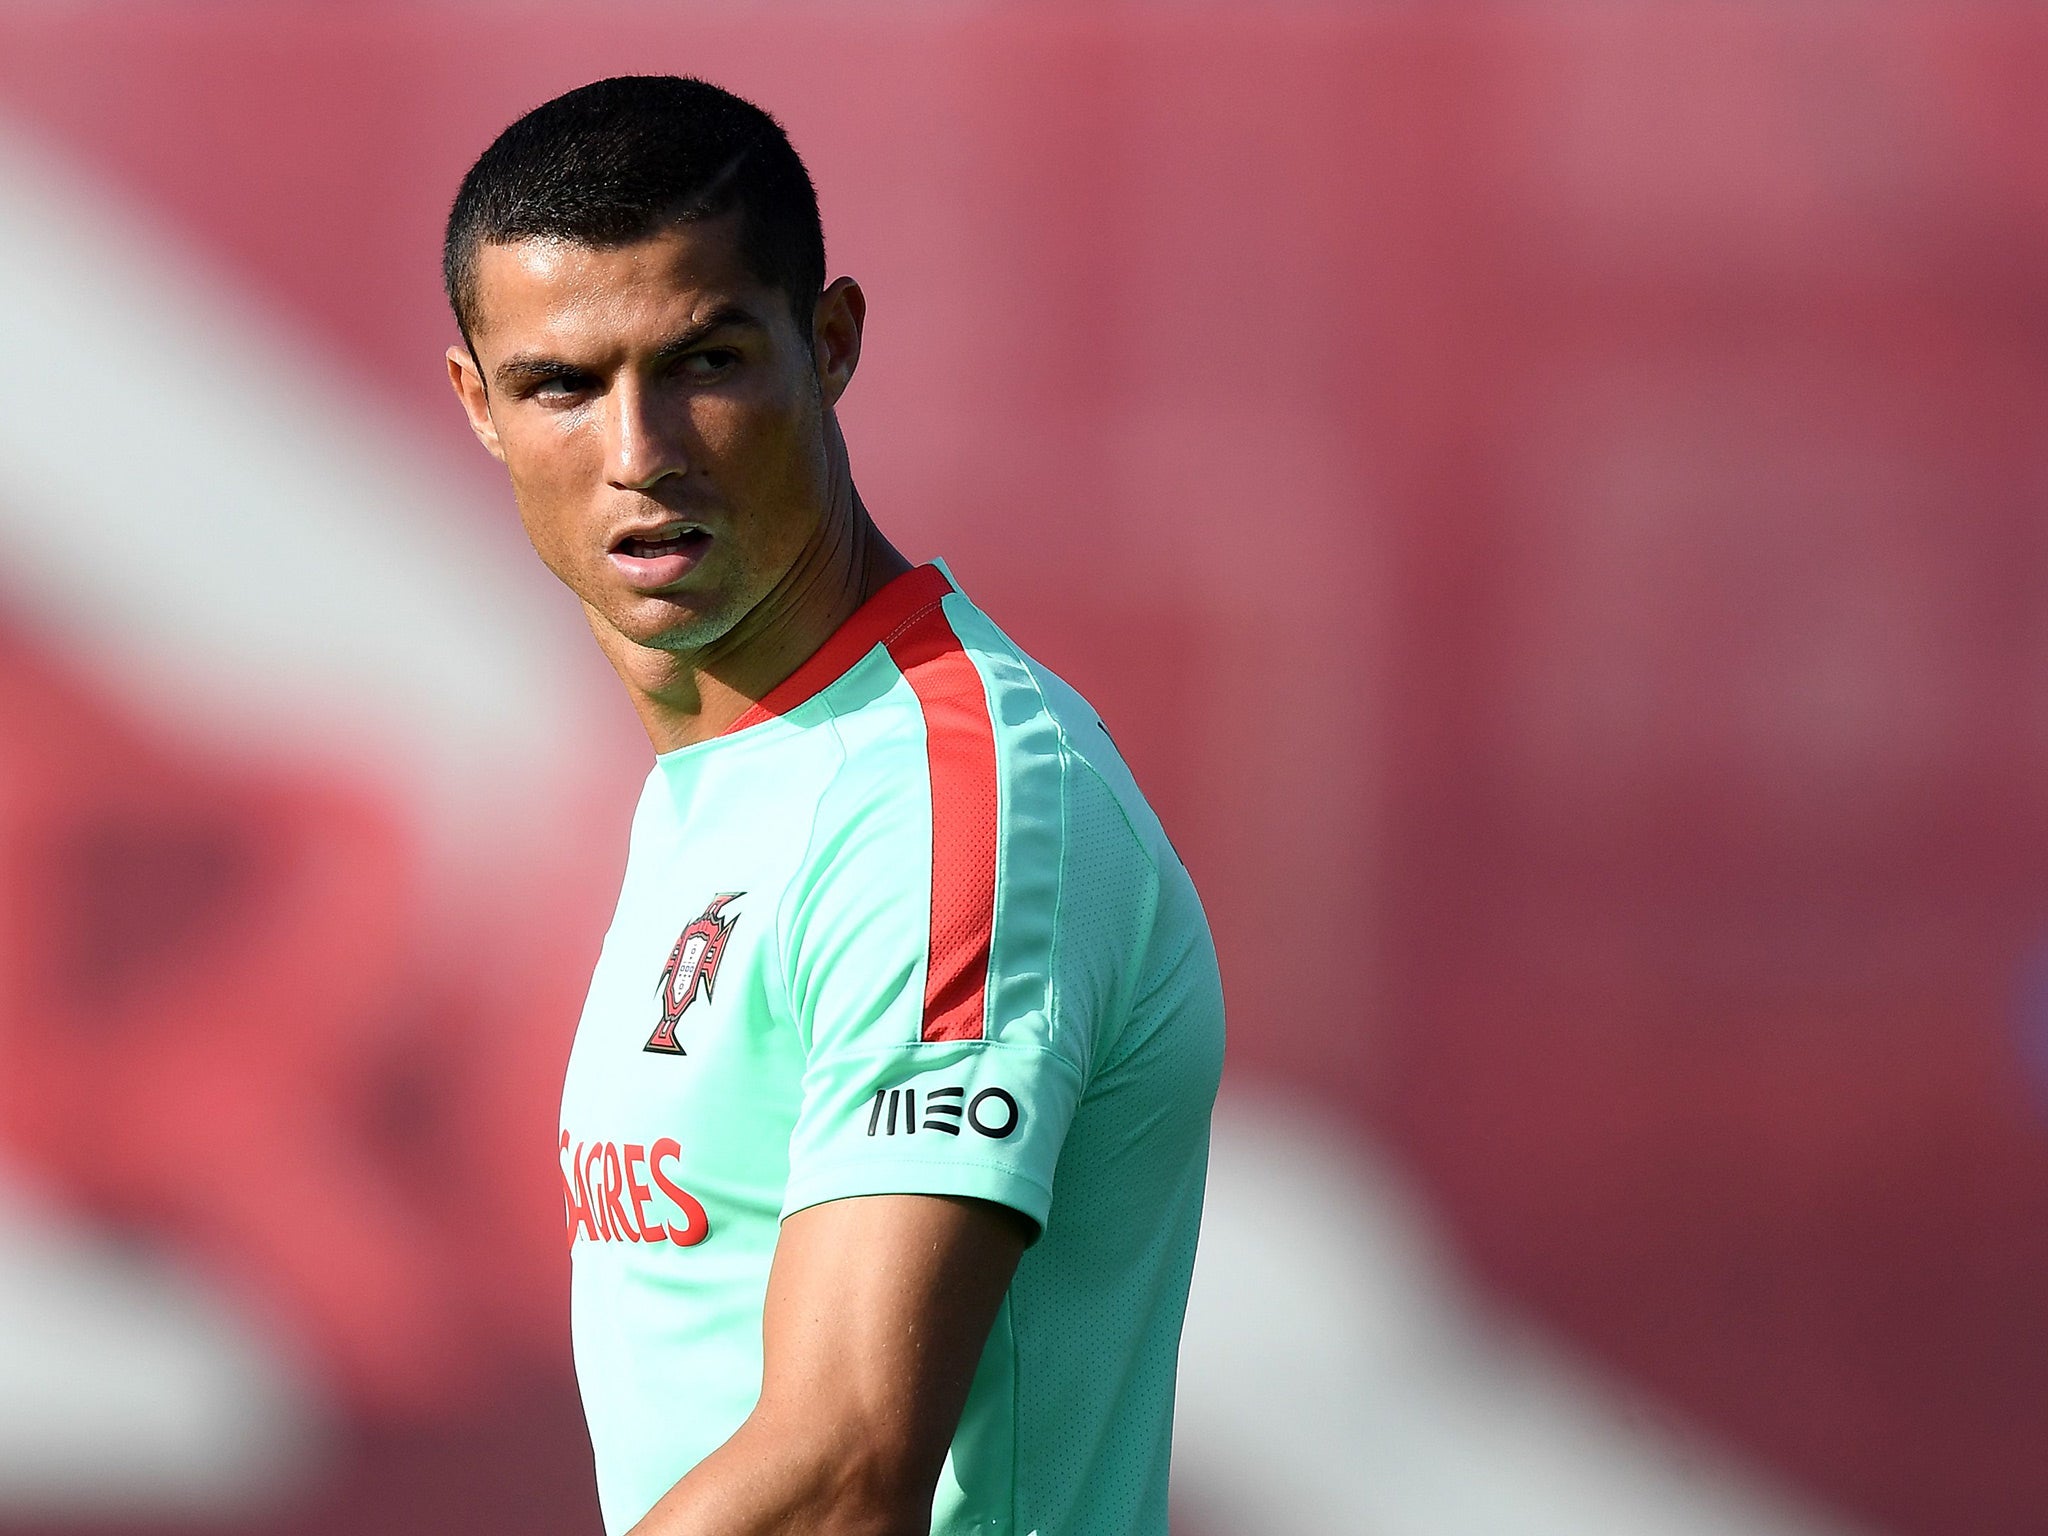 Cristiano Ronaldo will testify in his tax fraud case next month